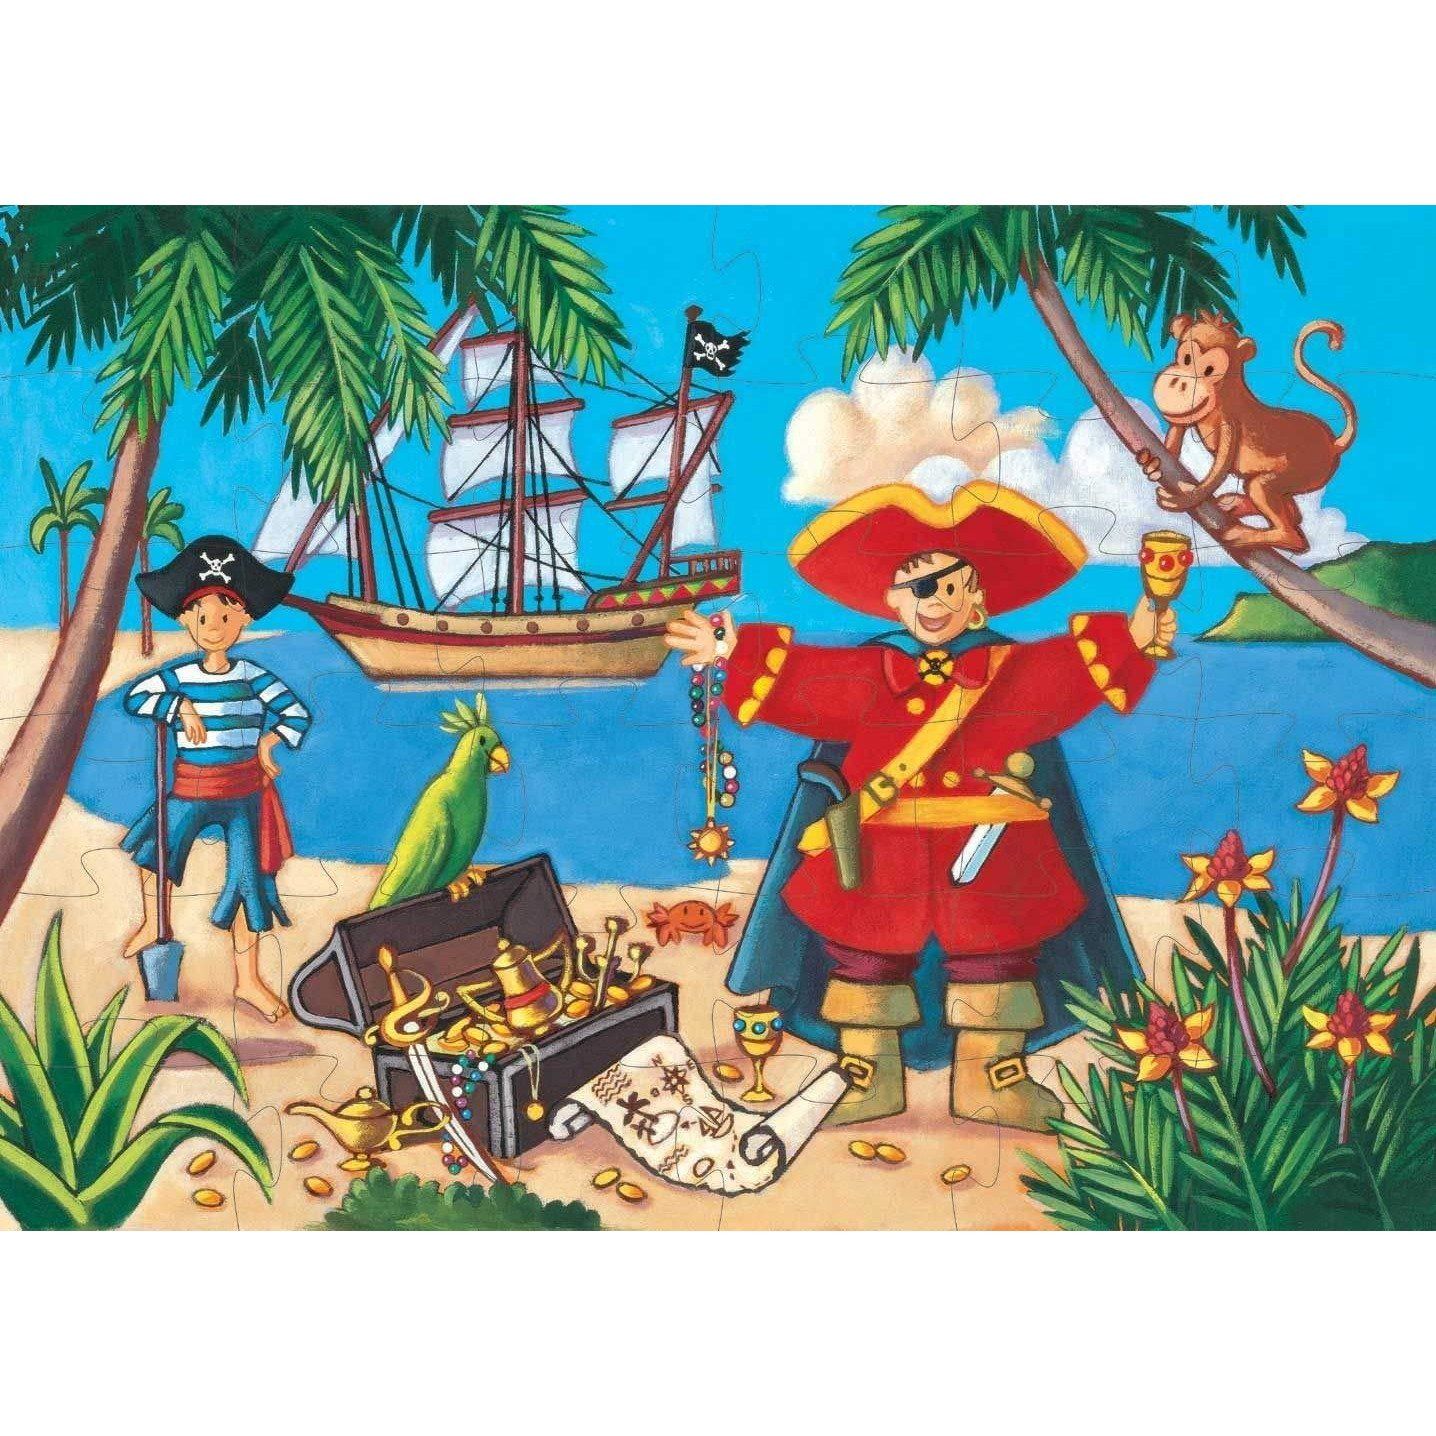 In The Forest Progressive Jig Saw Puzzles by Djeco, Premium French